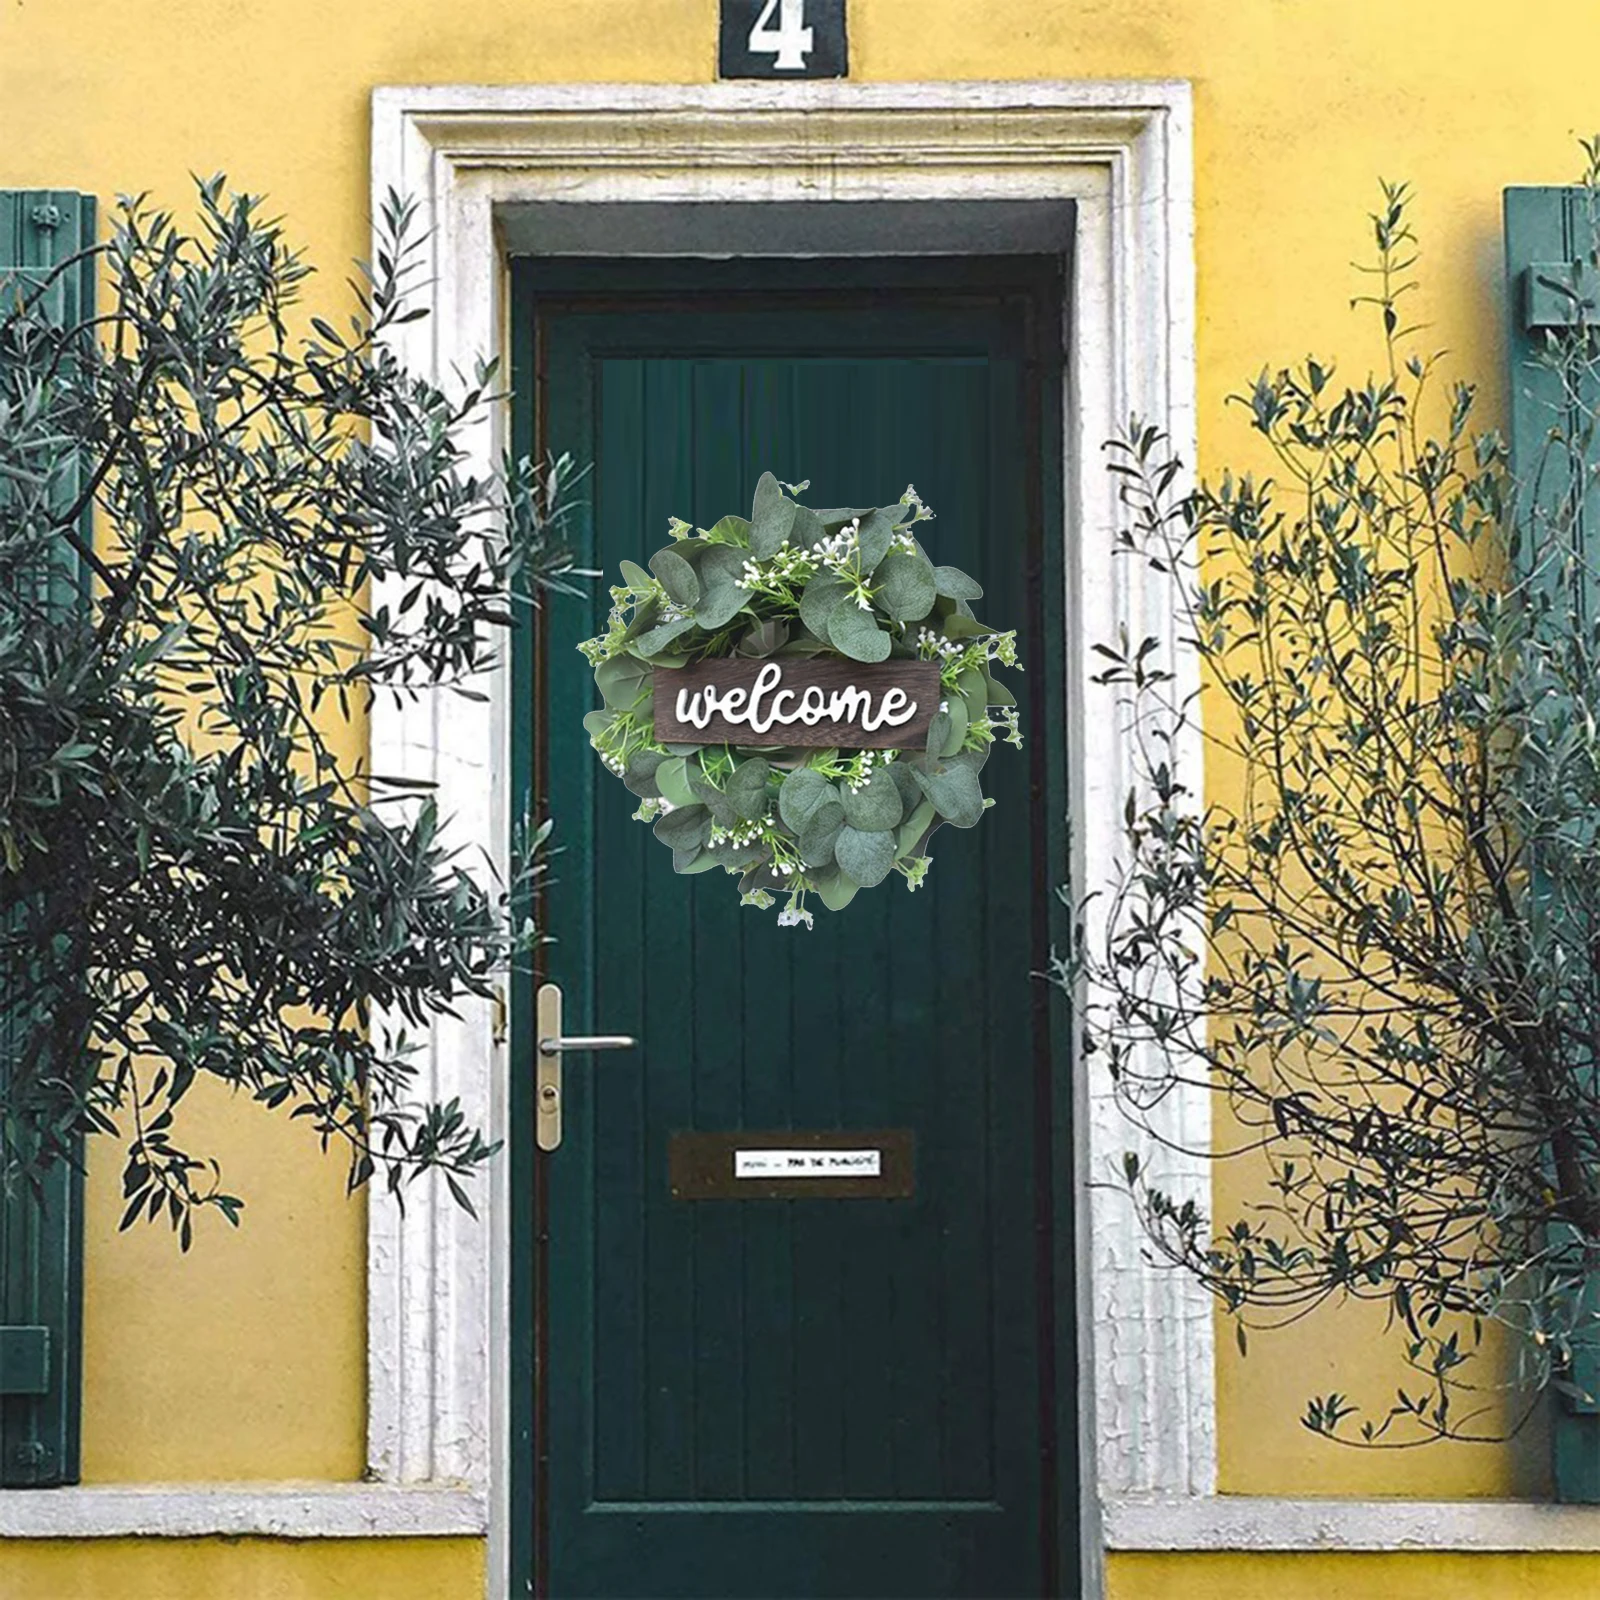 Details about   Restaurant Garland Hanging Wreath Welcome Sign Round For Front Door Home Decor 